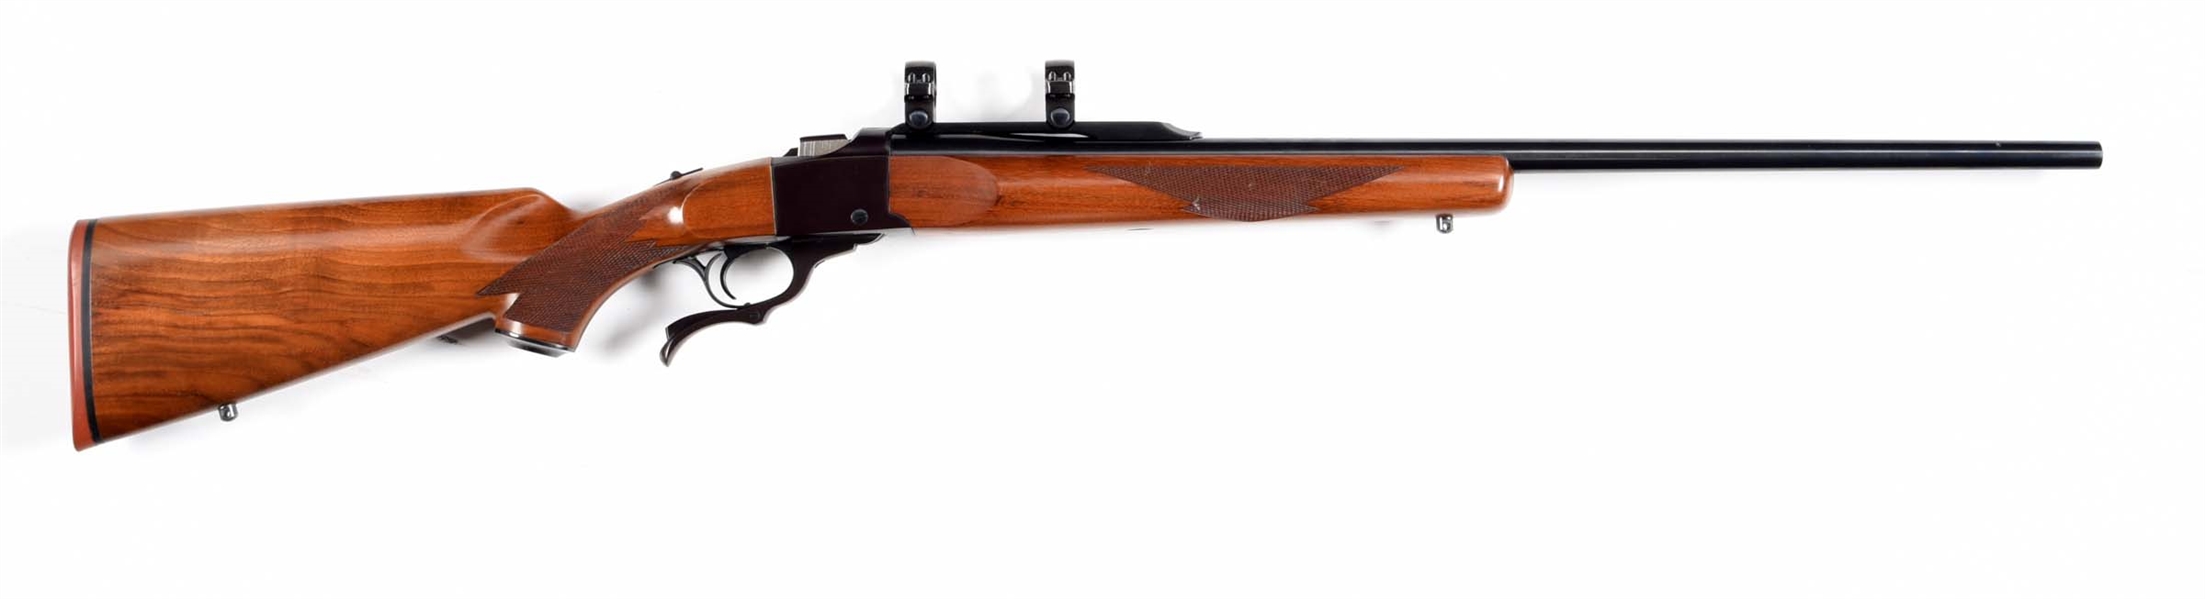 (M) RUGER NO. 1 SINGLE SHOT RIFLE IN .243 WINCHESTER.